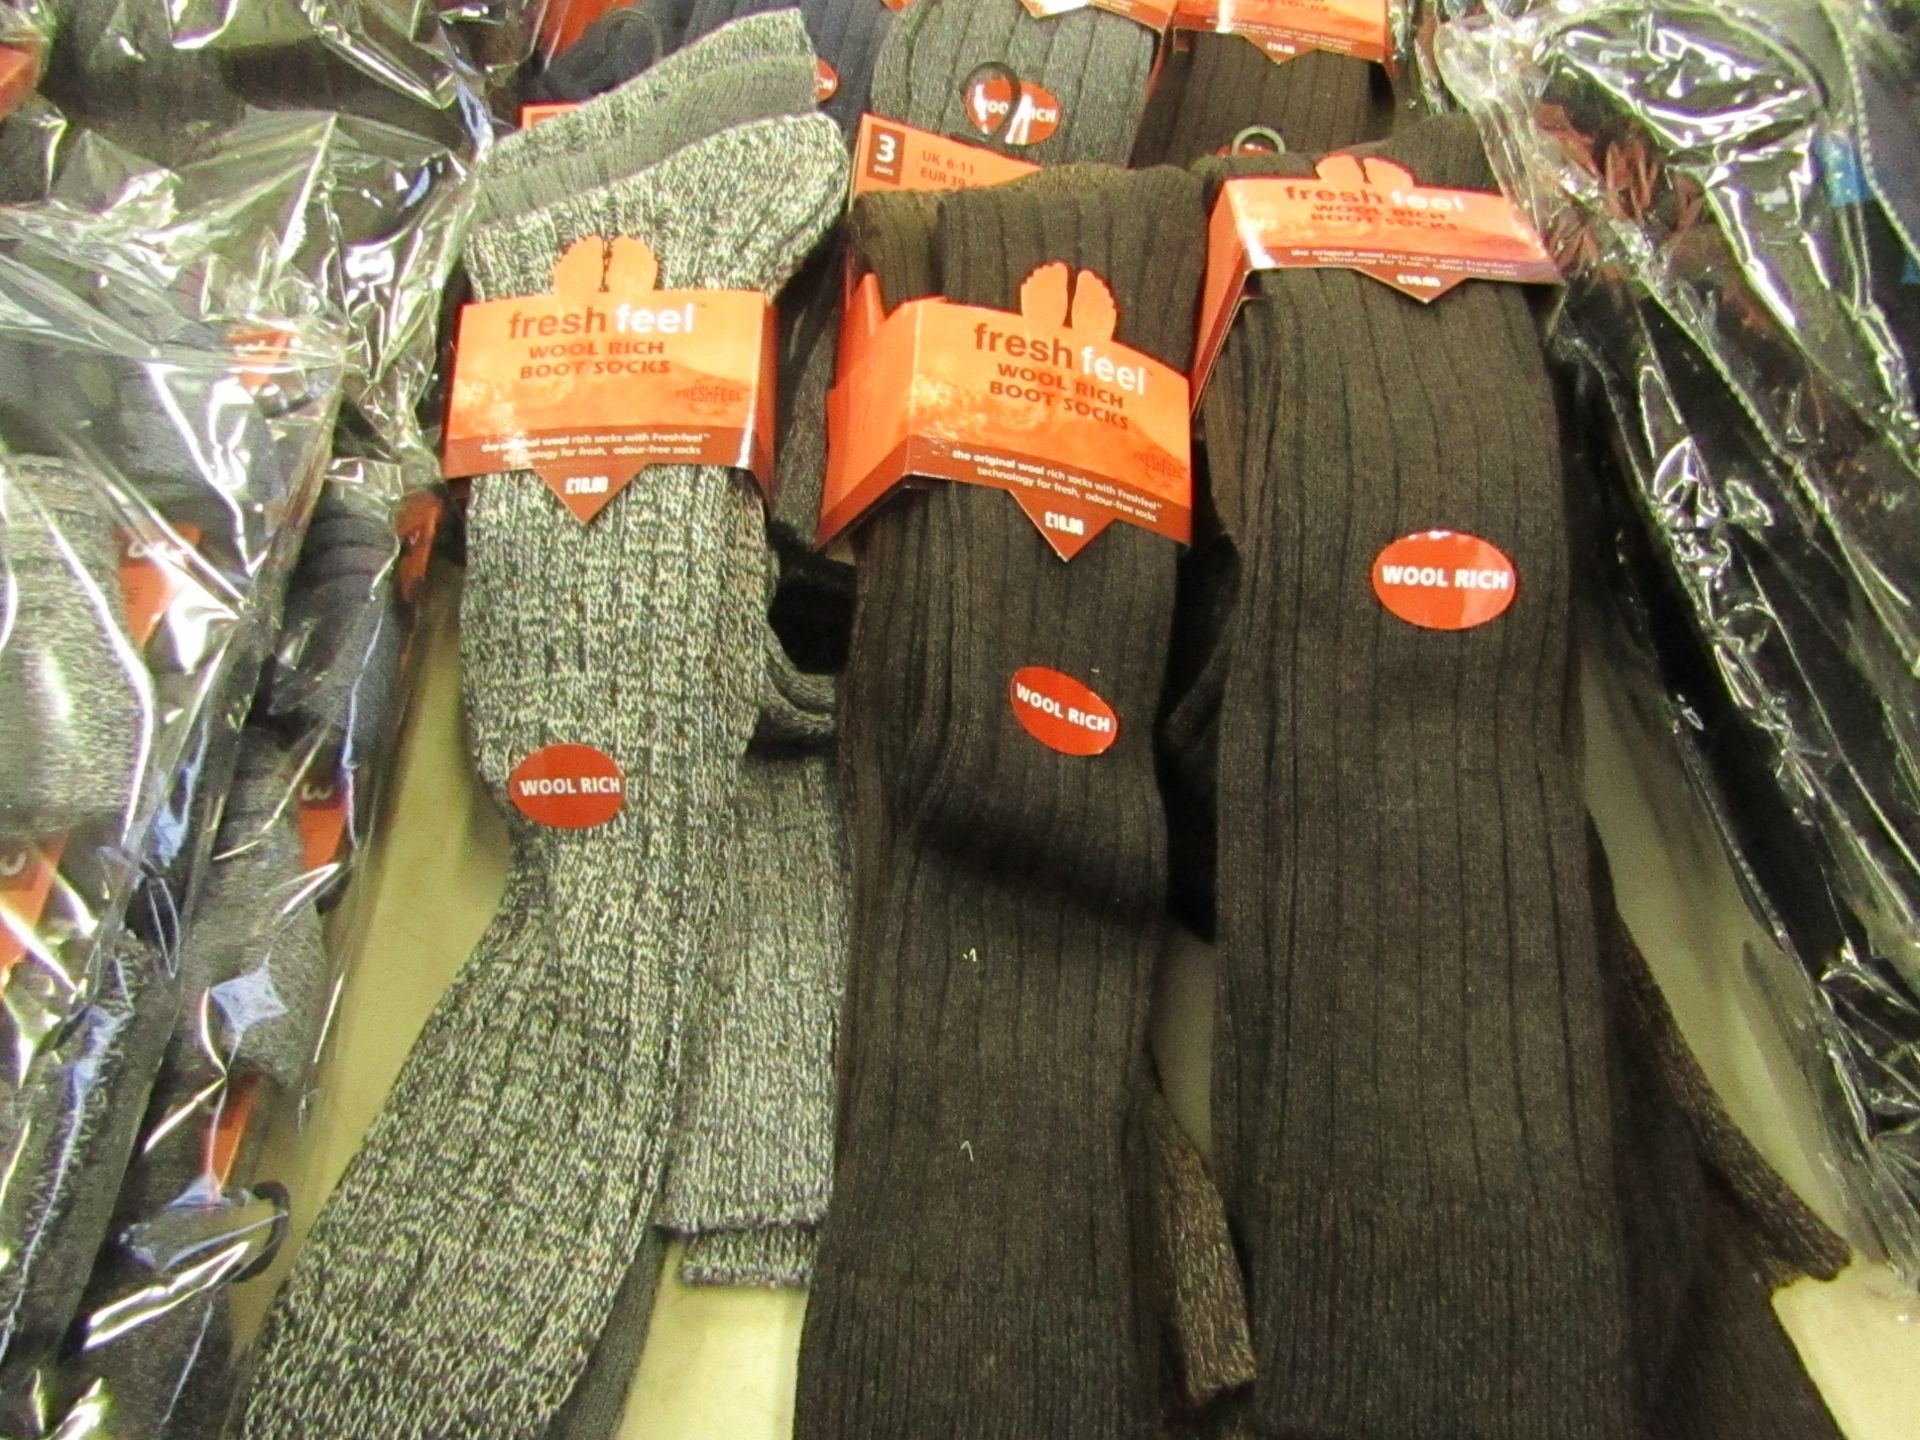 6 X Pairs of Rich Wool Boot Socks size 6-11 new in packaging